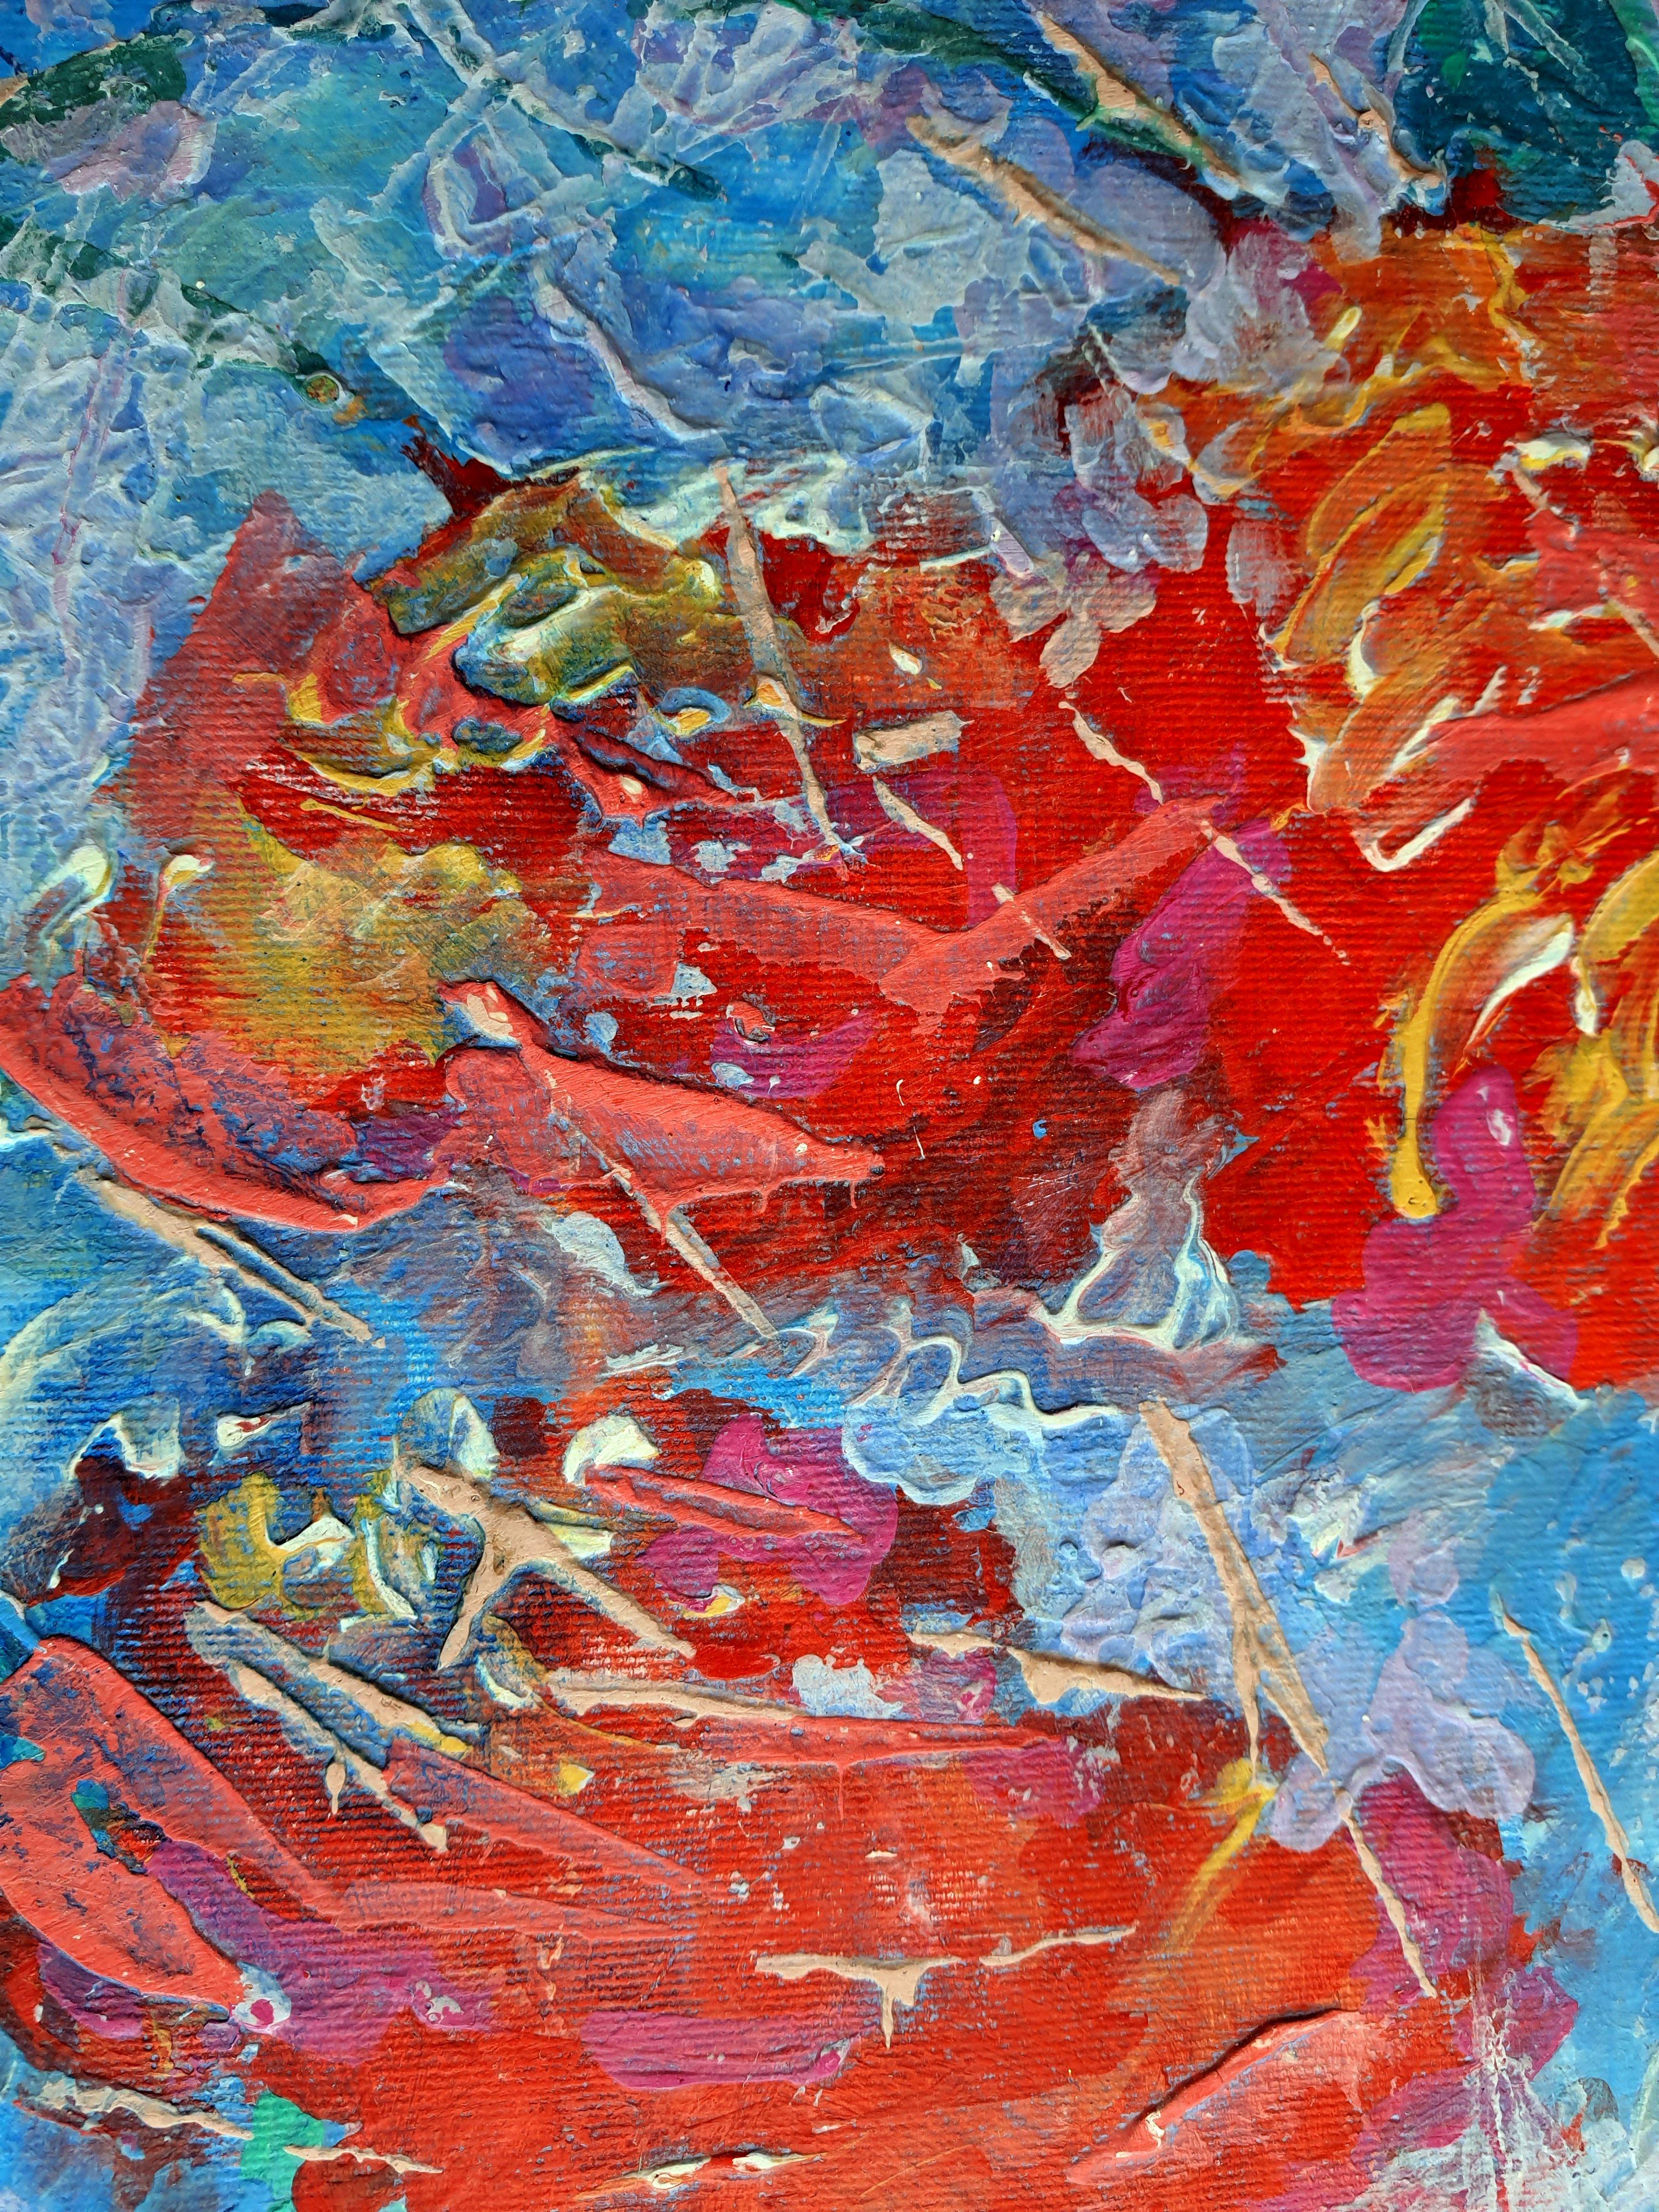 In my creation, I've unleashed a flurry of emotions onto the canvas, combining the rich textures of acrylics with the vibrant hues of oil. Inspired by expressionism and impressionism, I sought to capture the untamed beauty of nature, the dance of